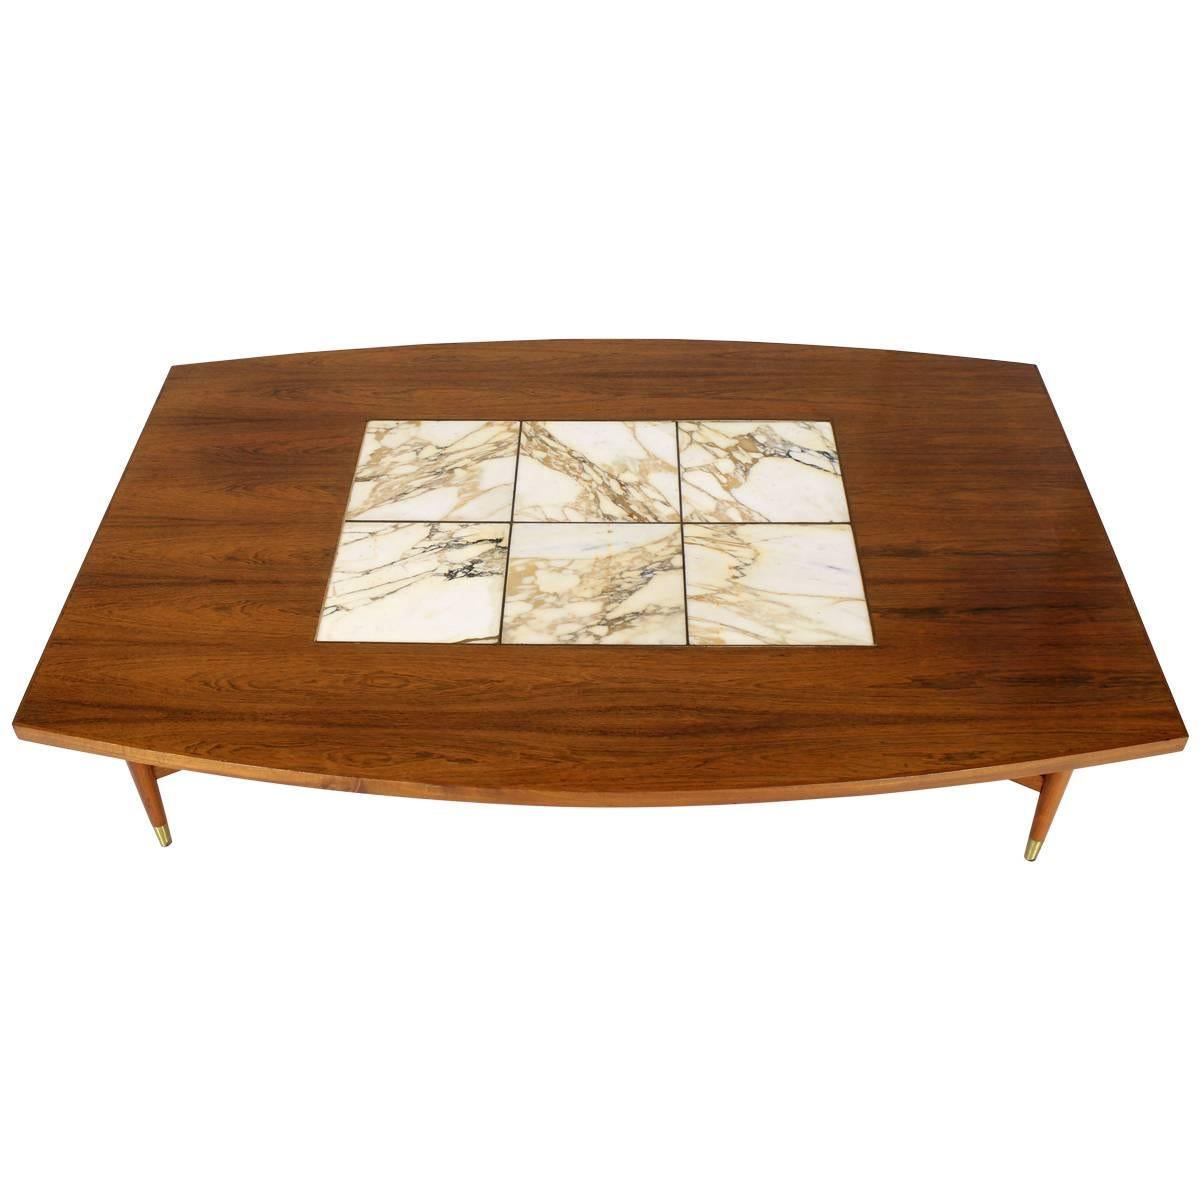 Large Oversize Boat Shape Rosewood & Walnut Coffee Table Brass Inlay Marble Tile